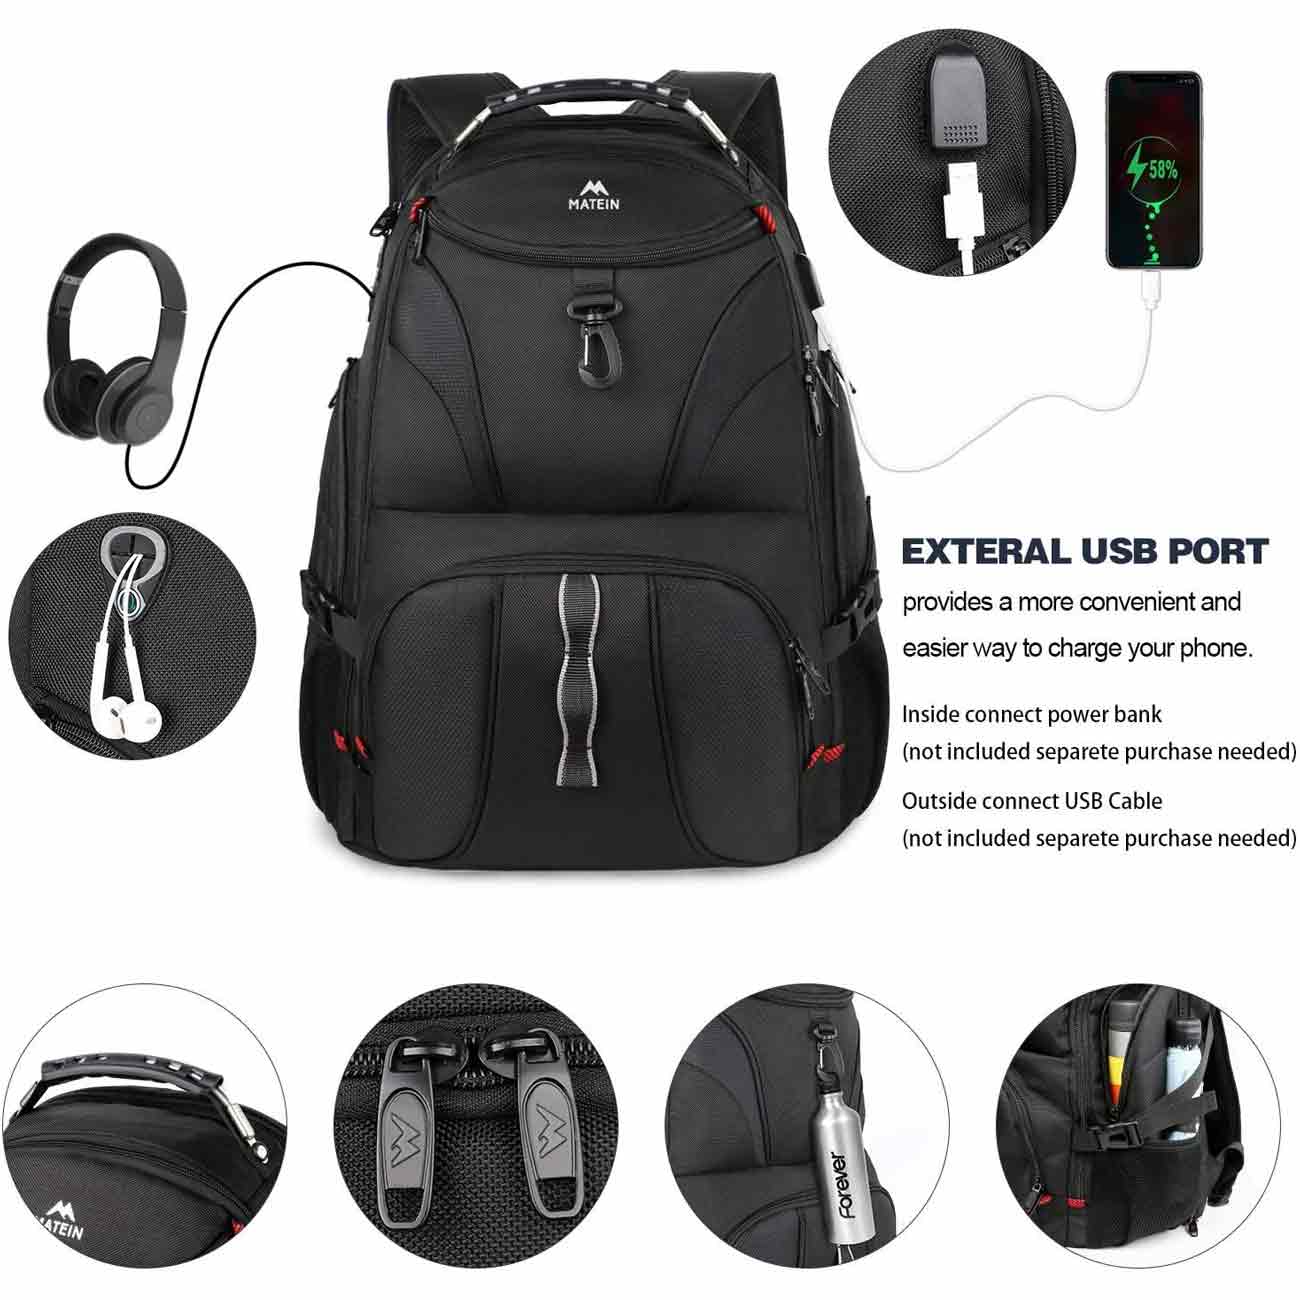 Matein Maokai Travel Backpacks with Lots of Pockets